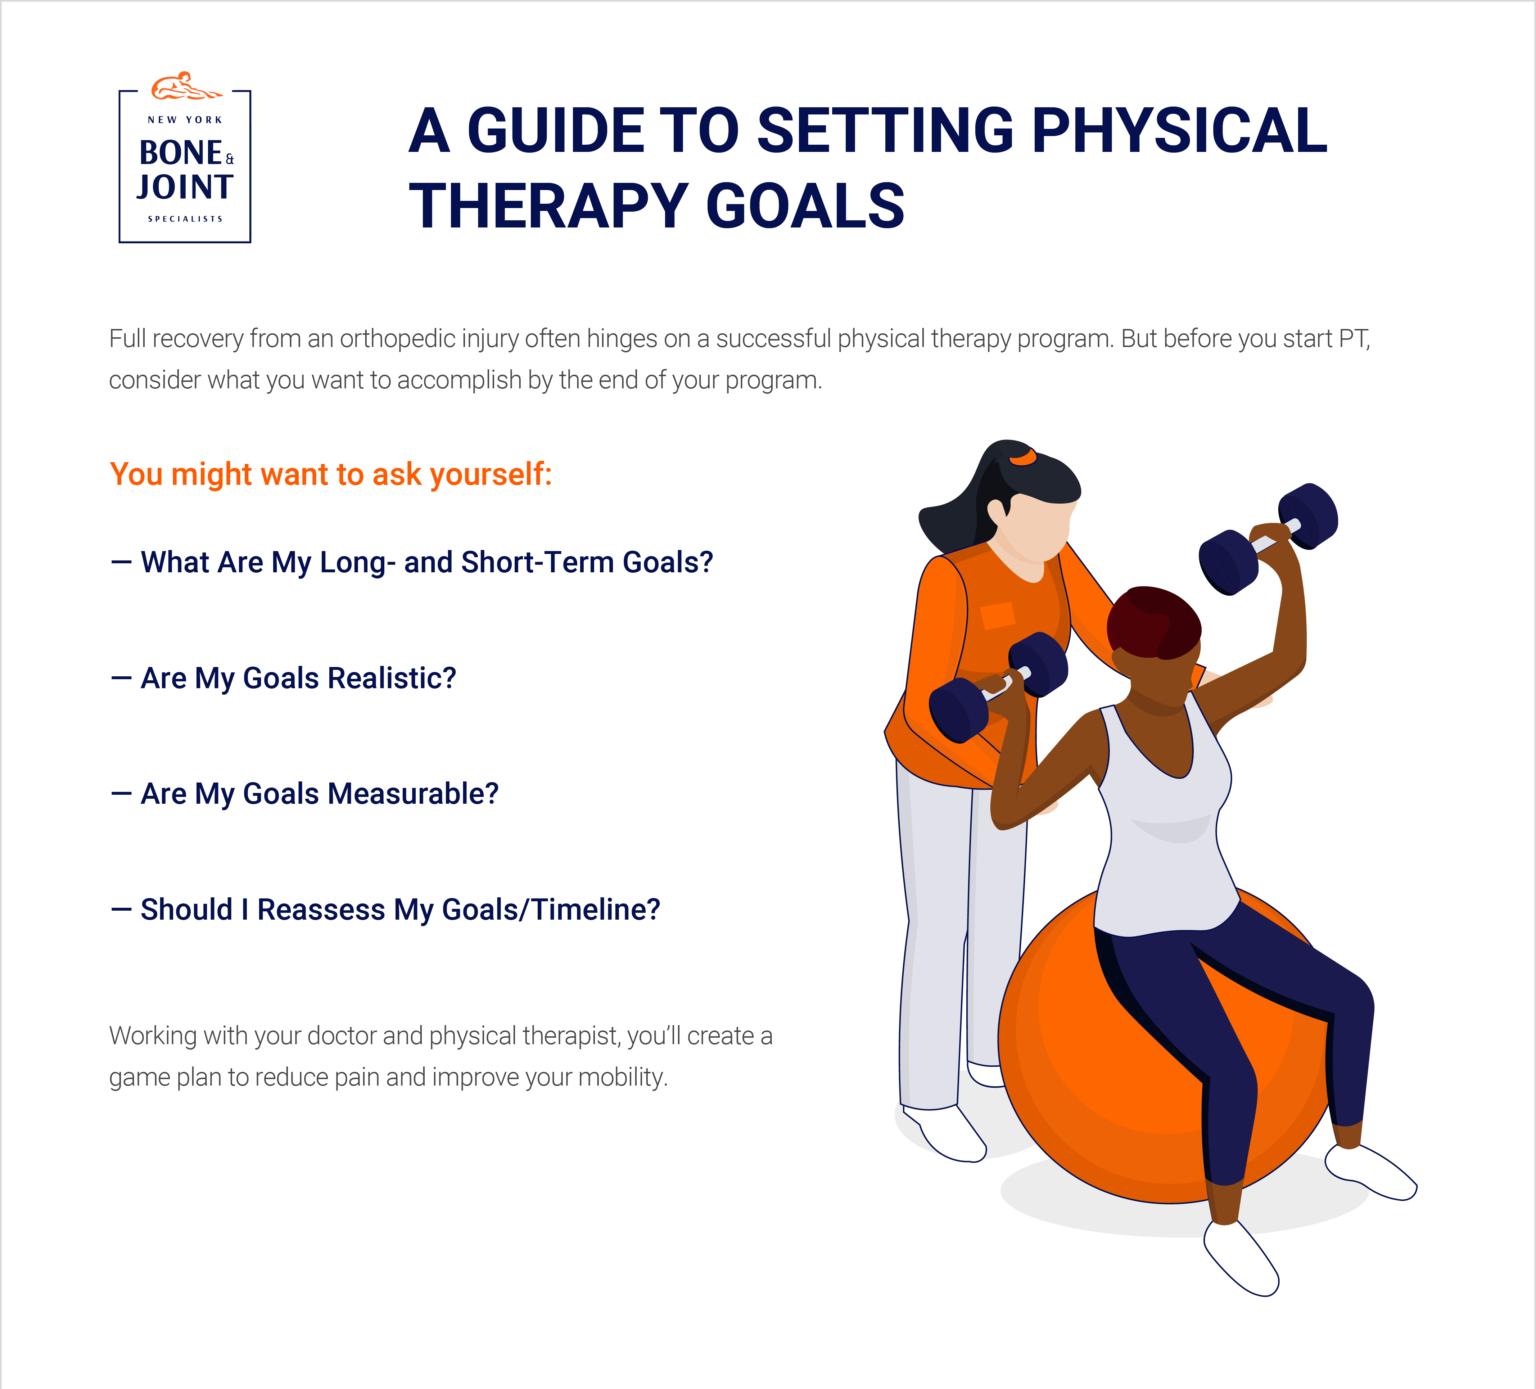 A Guide to Setting Effective Goals for Your PT Program - New York Bone ...